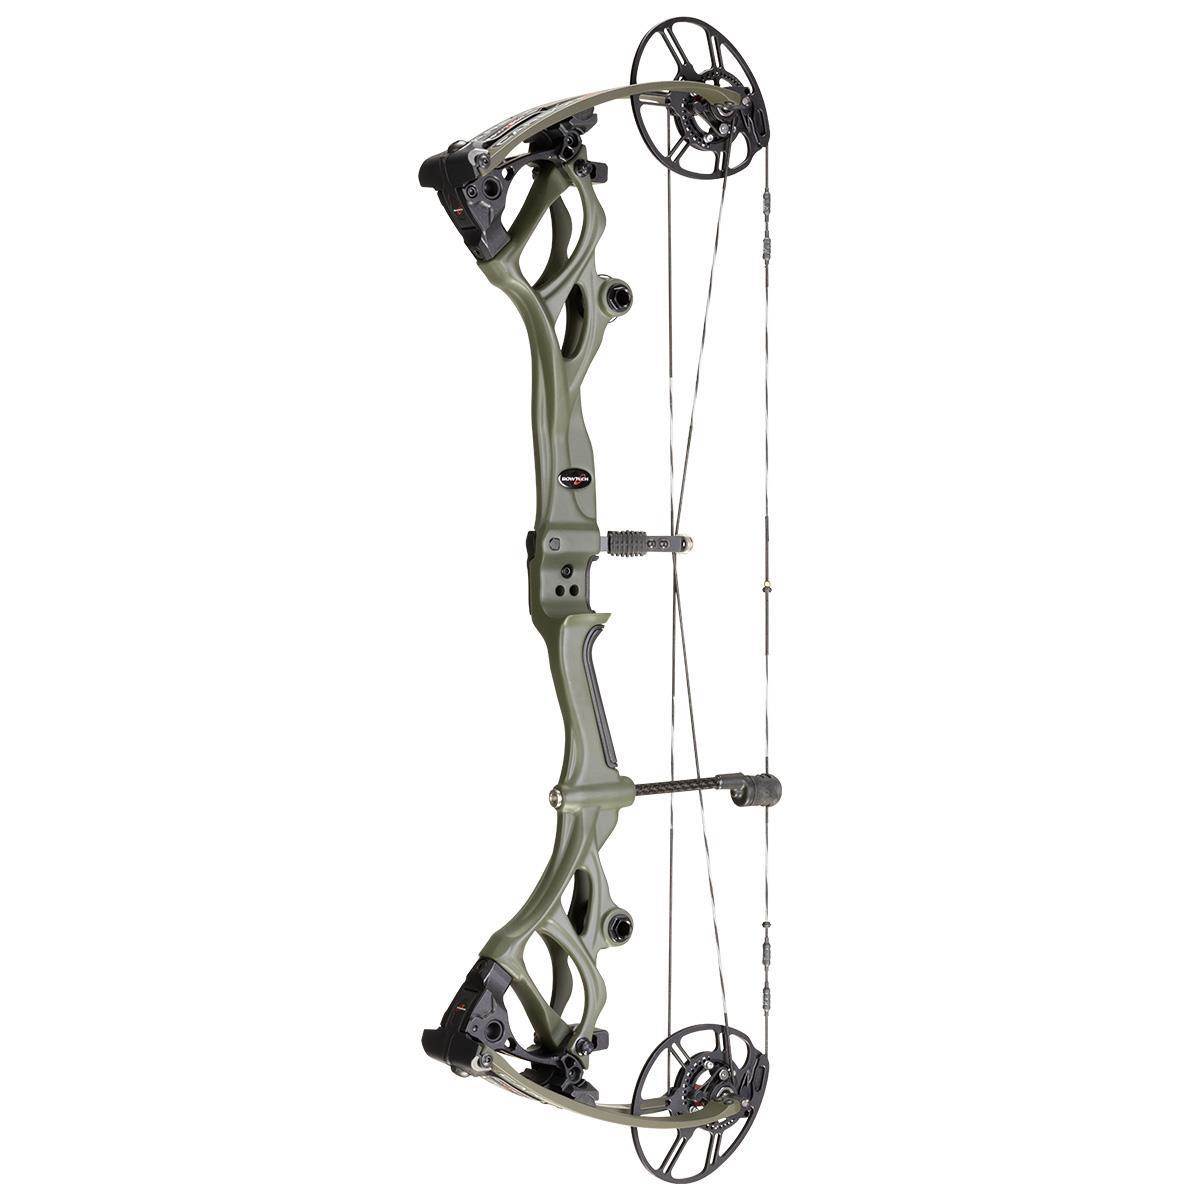 The Best Archery Deer Gear For 2023 - North American Whitetail